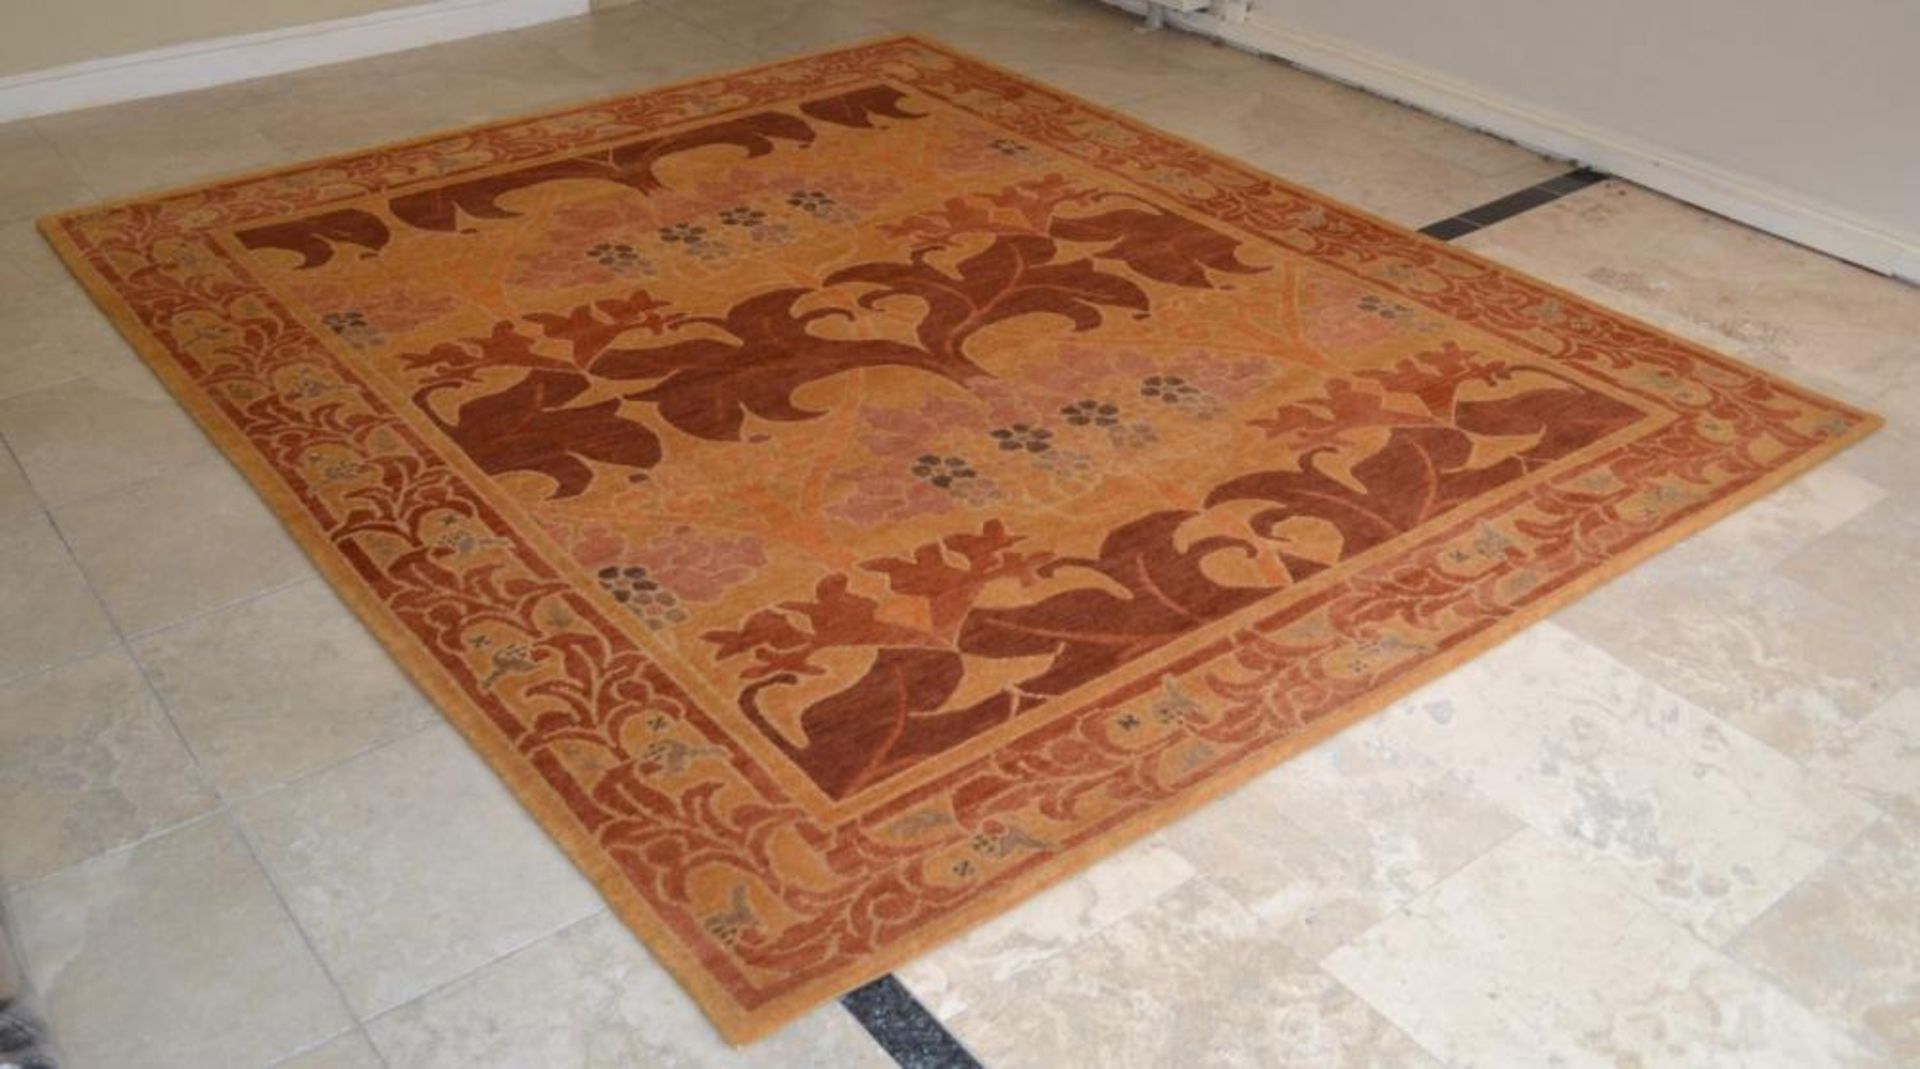 1 x Nepalese Terracotta Arts & Crafts Design Hand Knotted Rug - 100% Handspun Wool - Dimensions: - Image 9 of 18